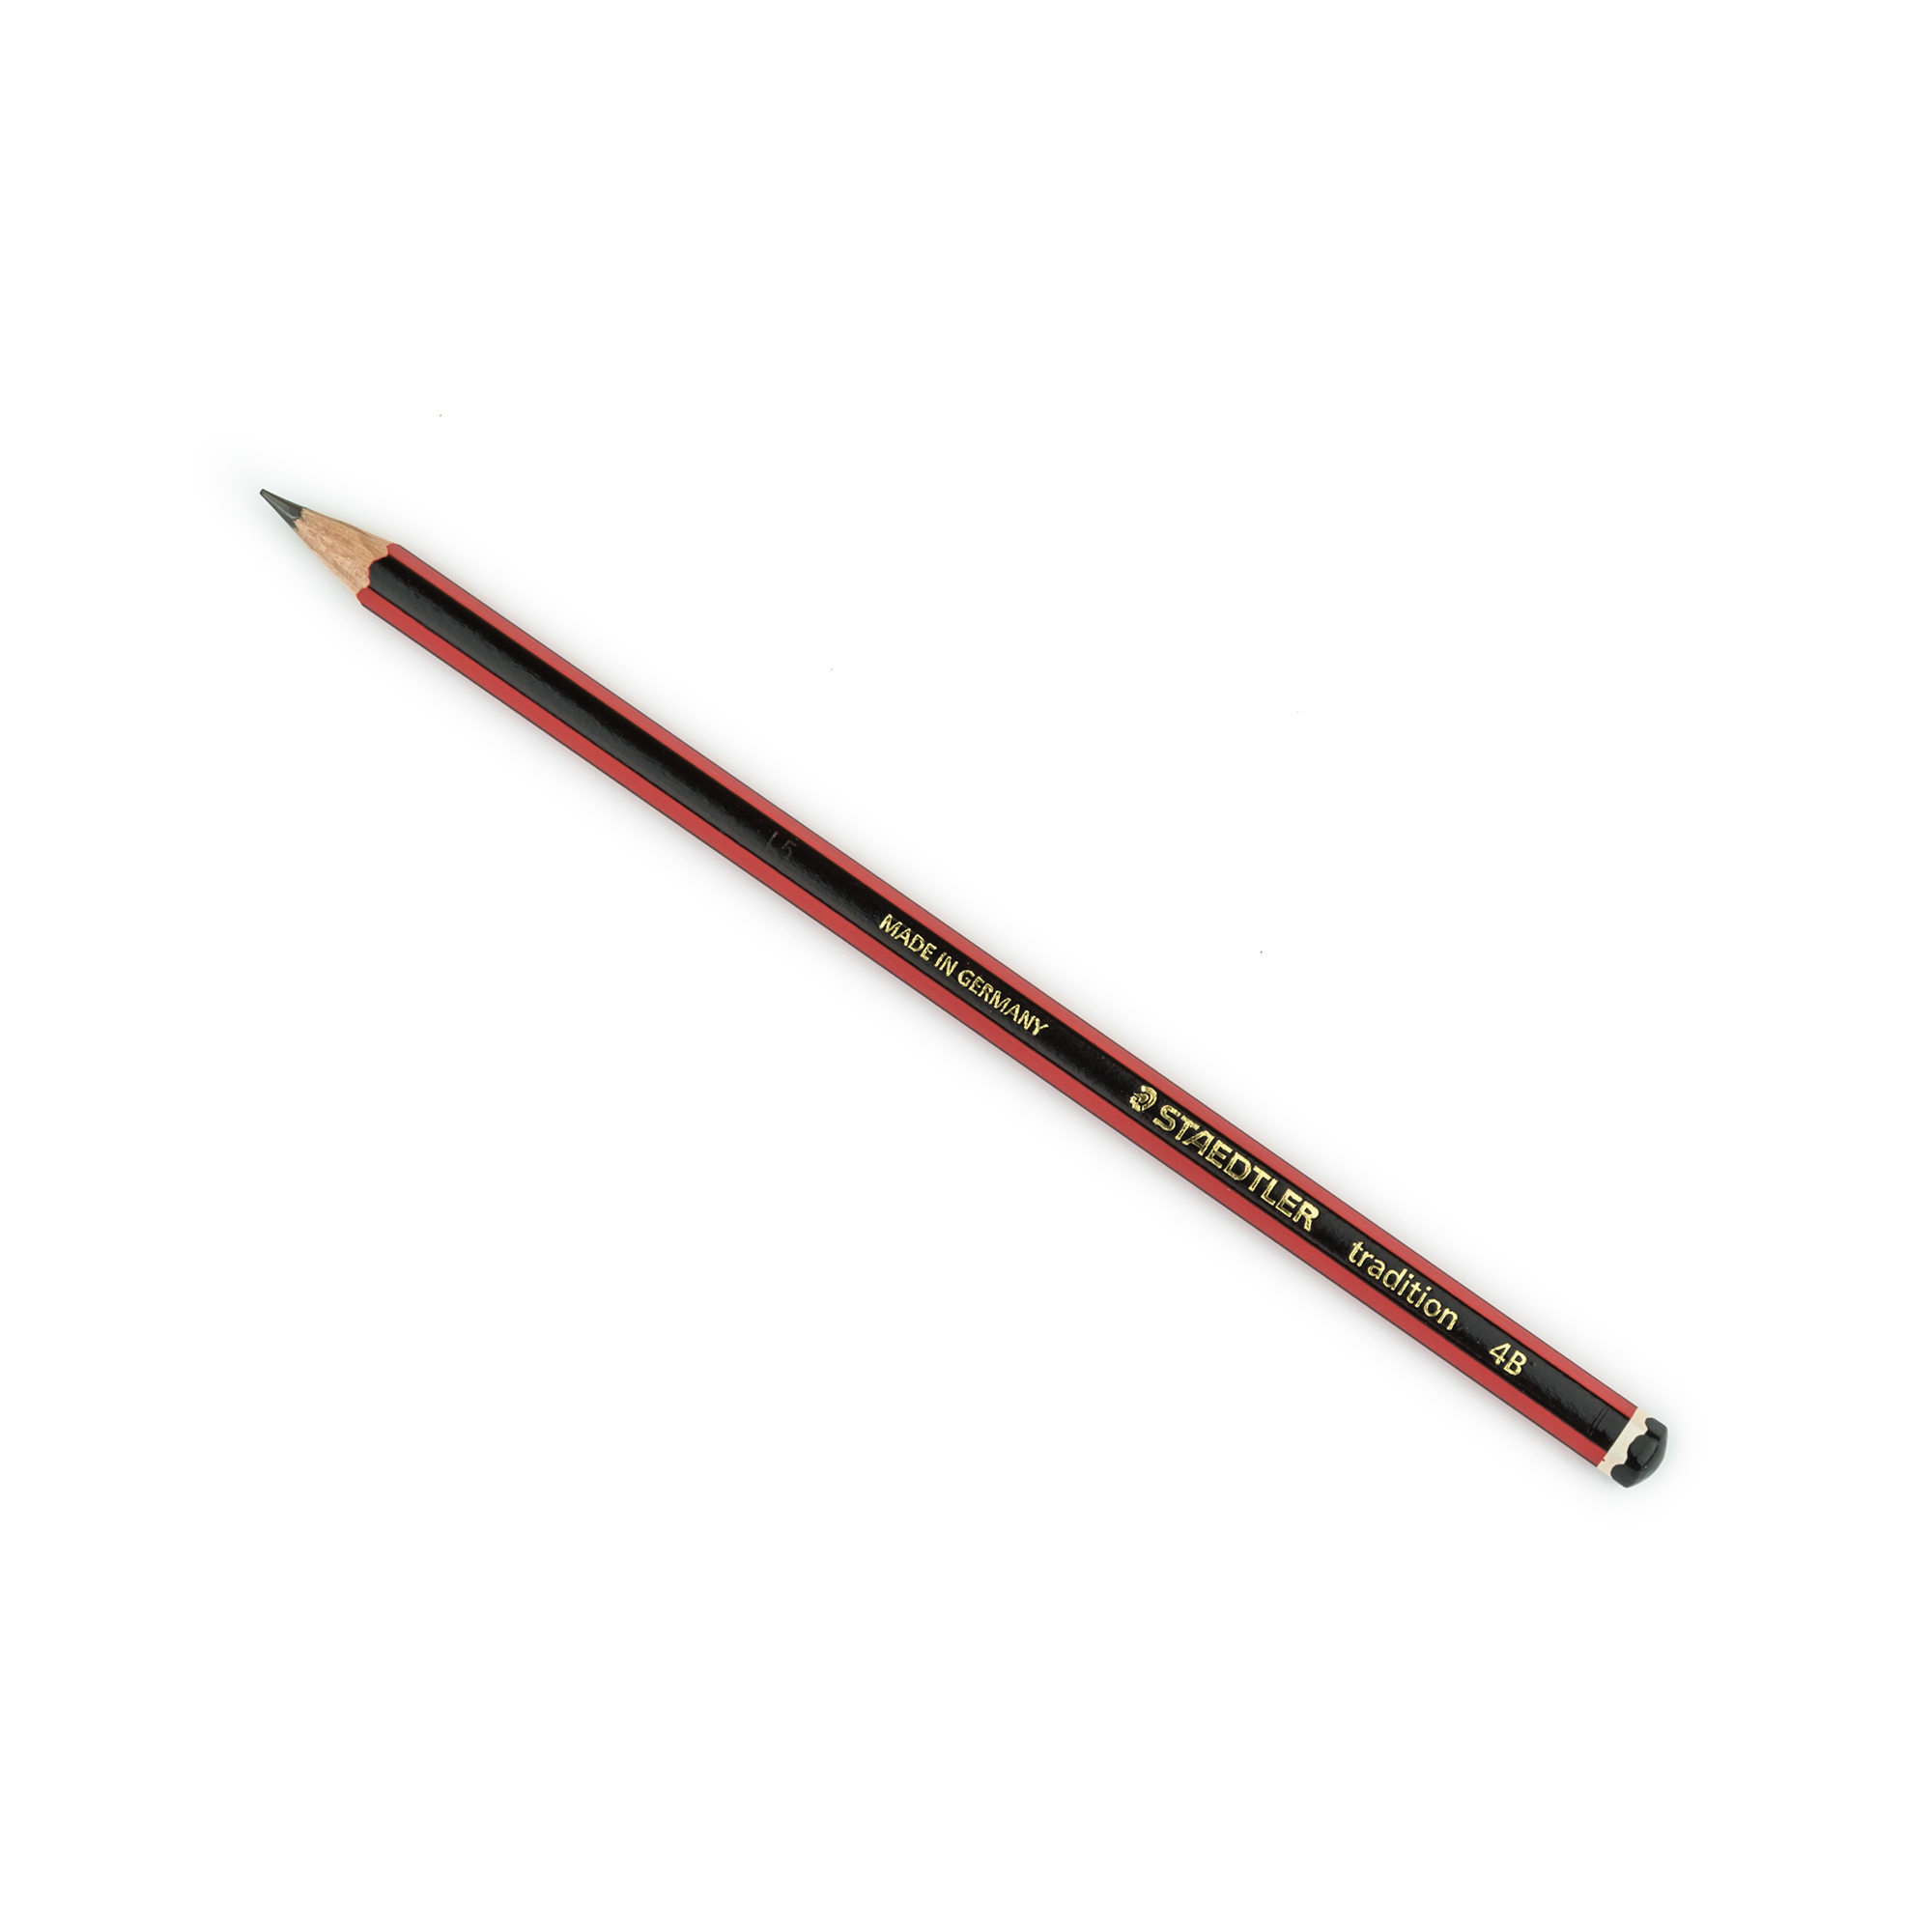 STAEDTLER 4B TRADITION PENCIL